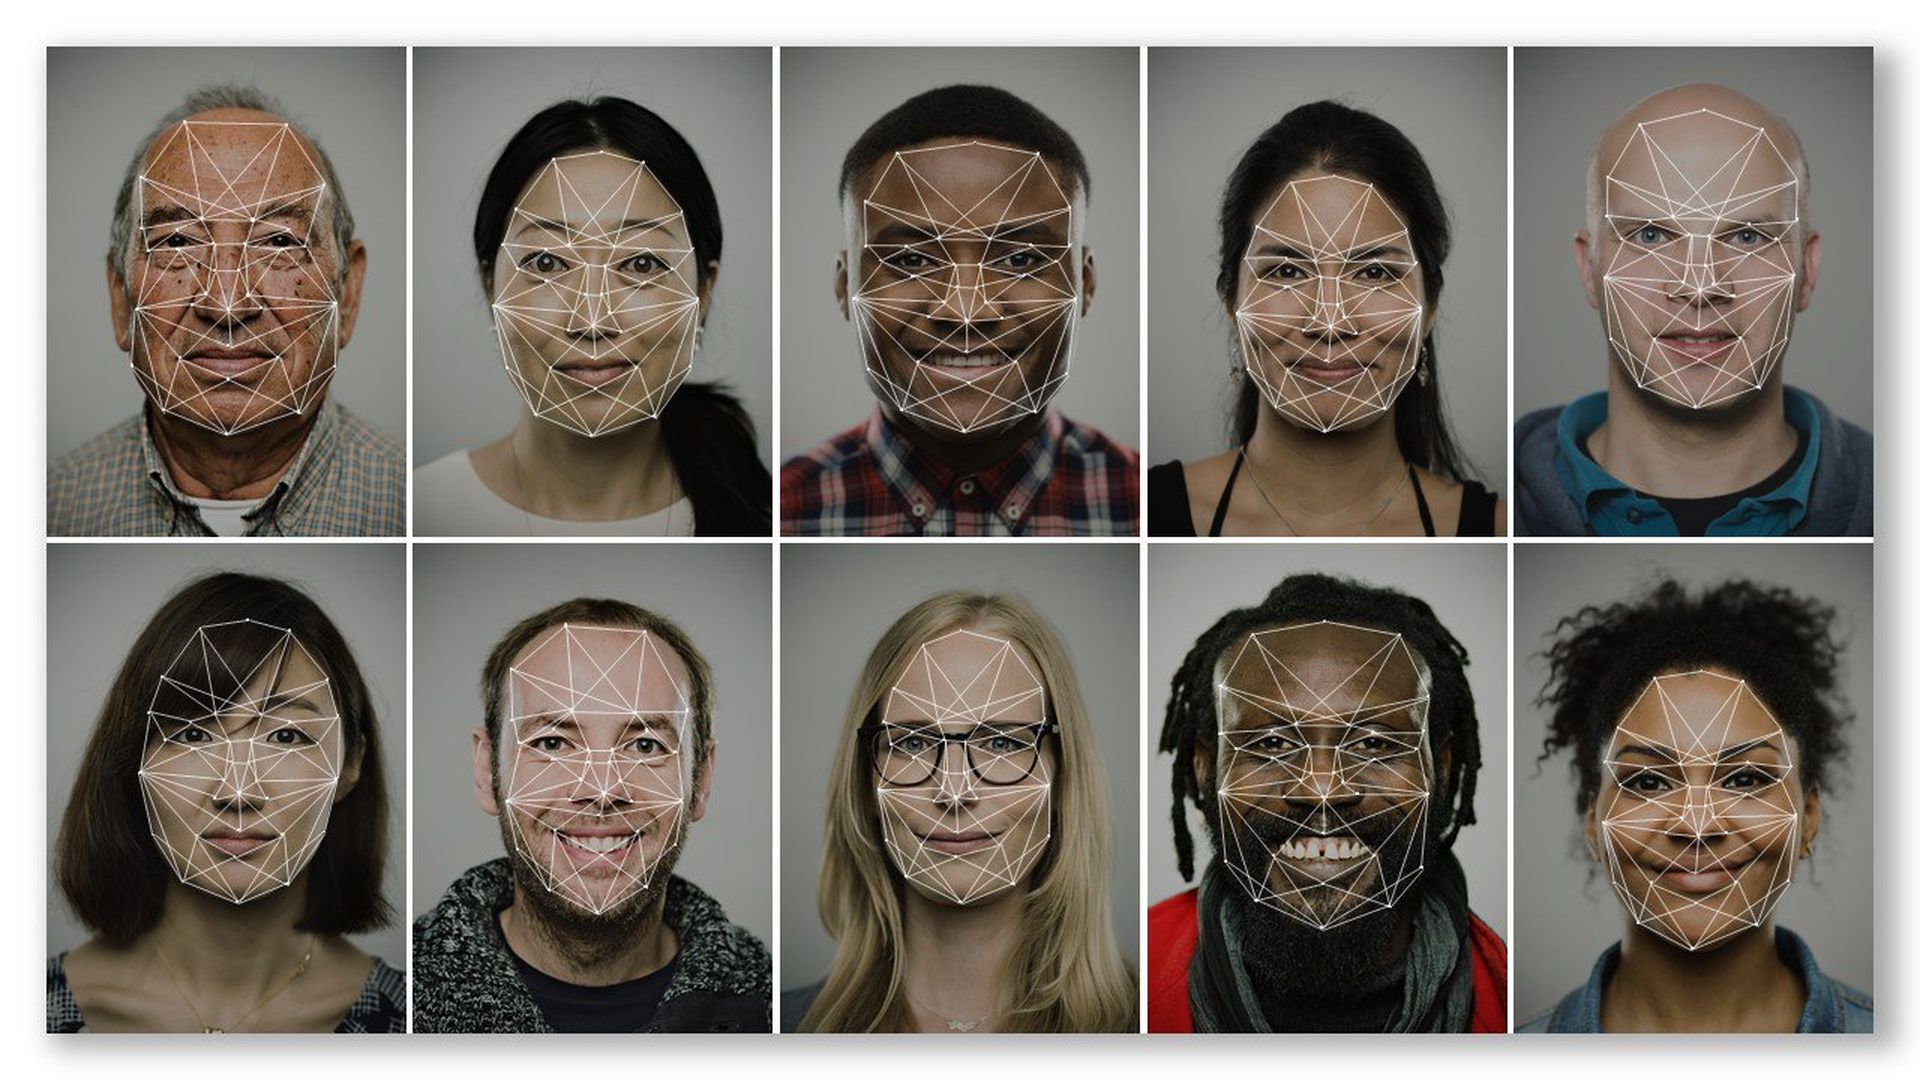 Several faces being identified using face recognition technology